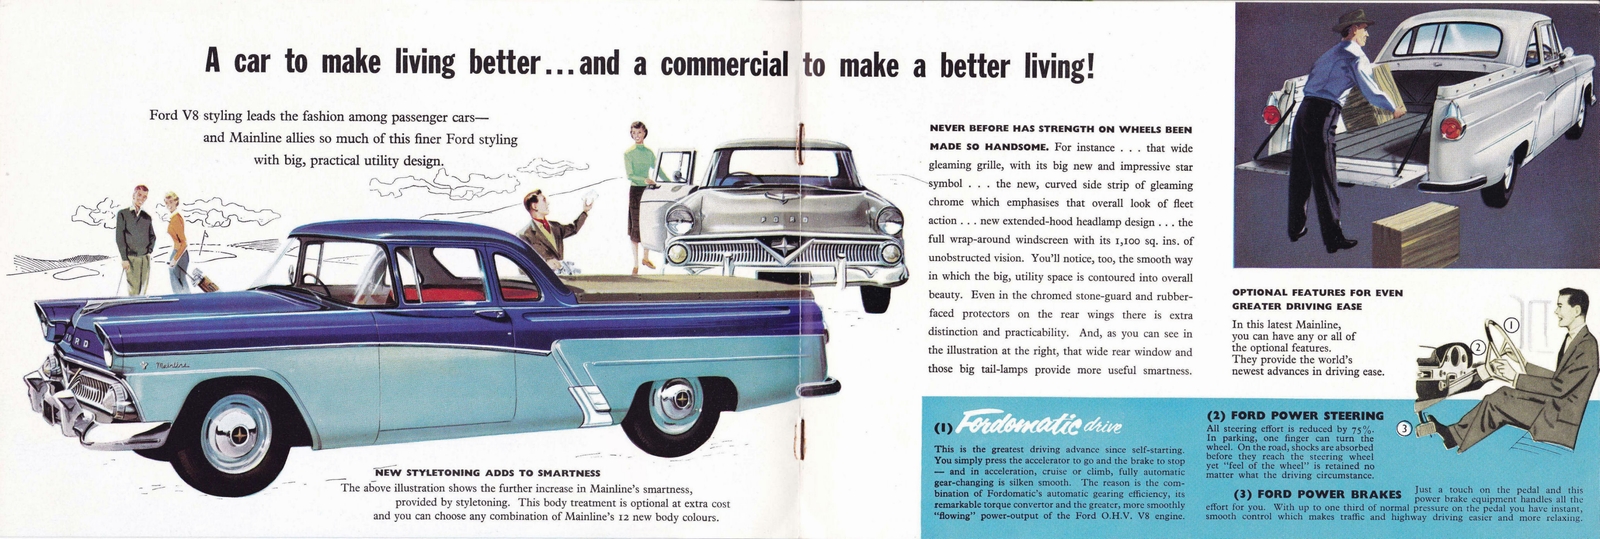 n_1958 Ford Mainline Coupe Utility-04-05.jpg